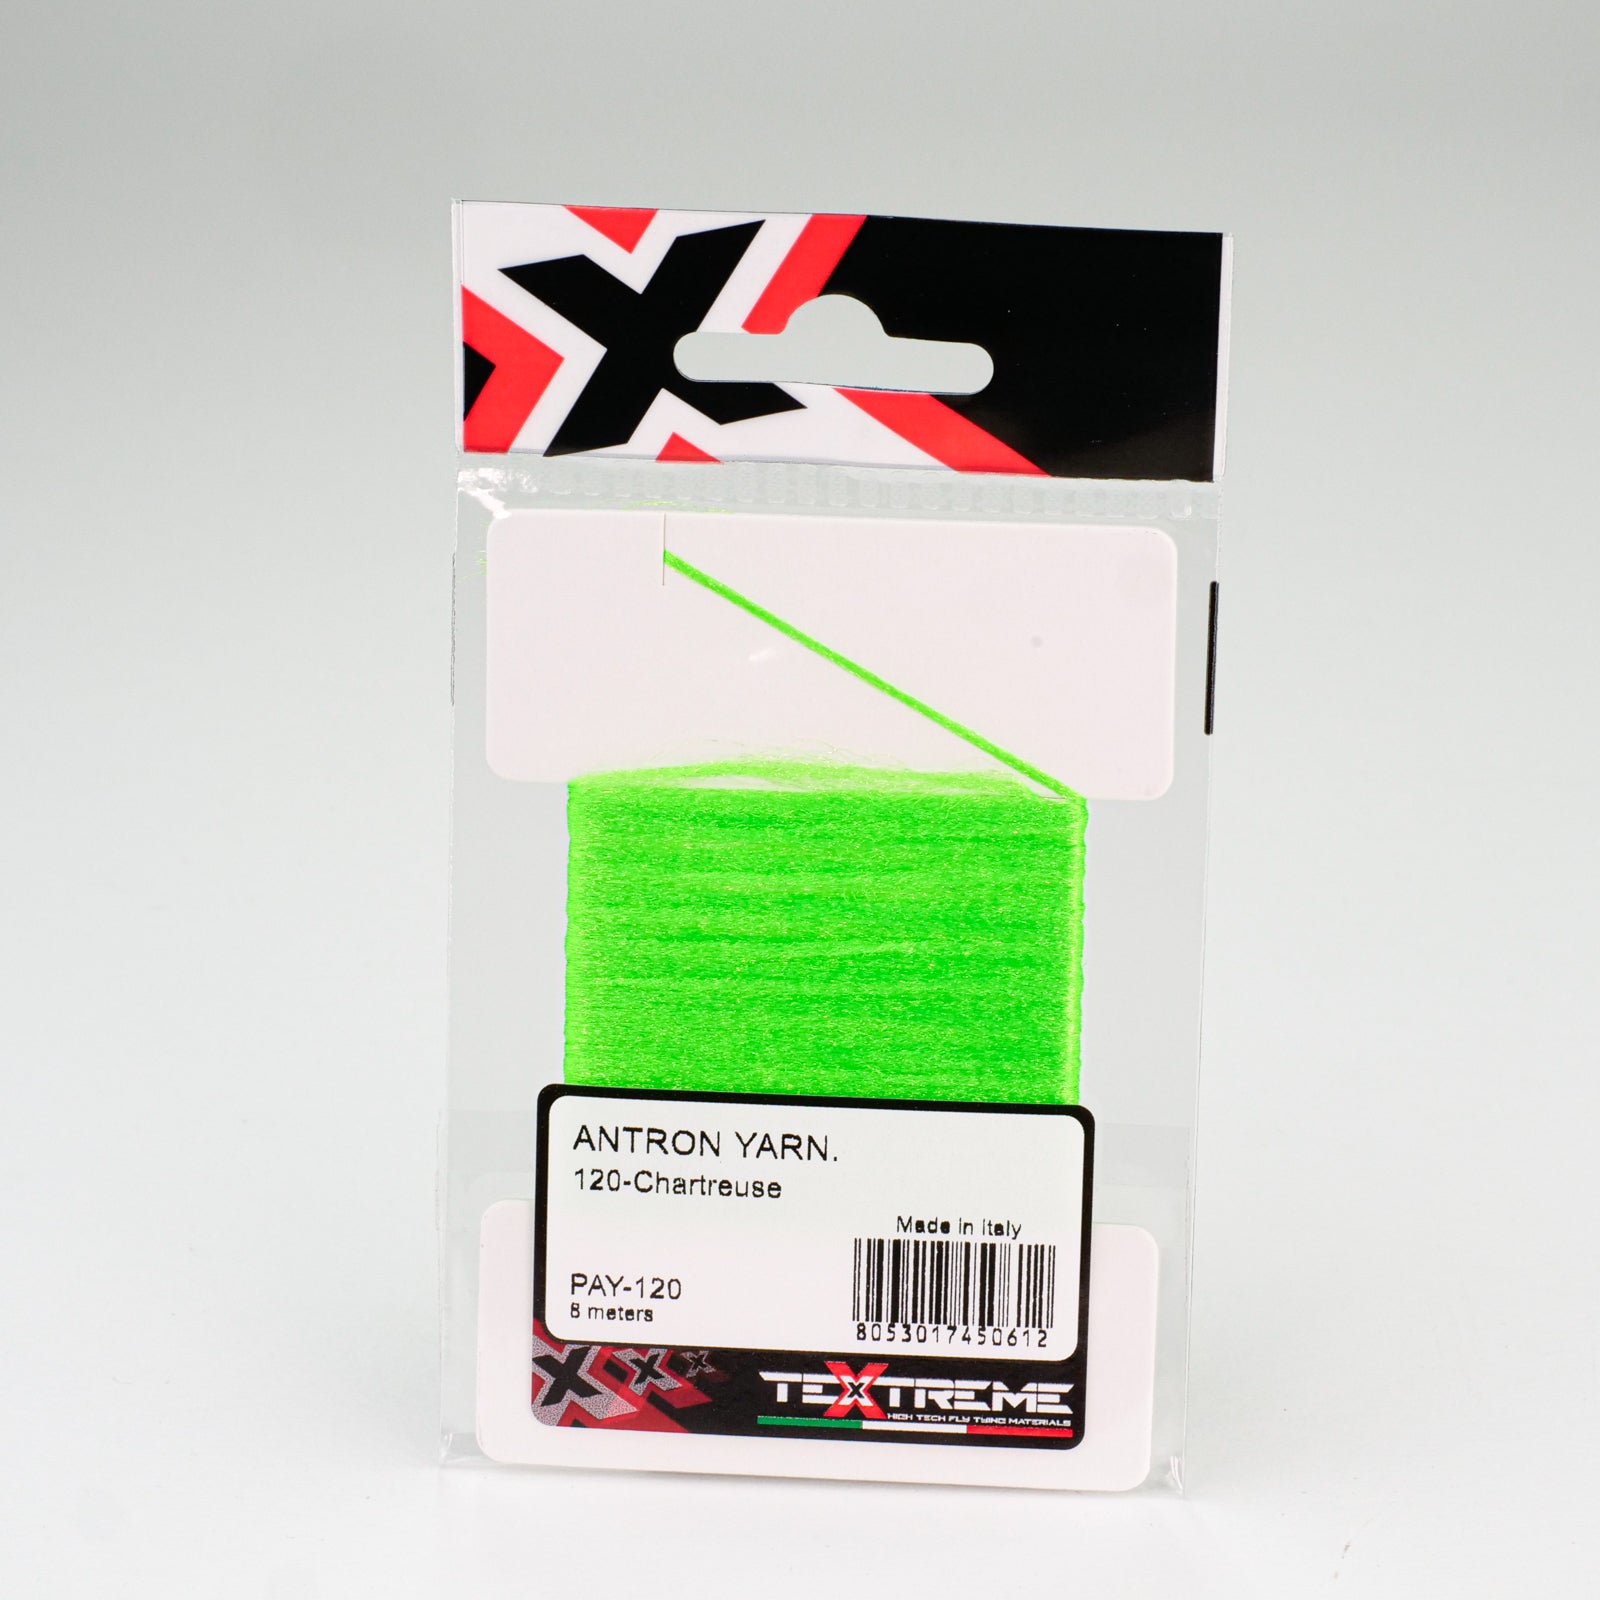 Feathers – Textreme – High Tech Fly Tying Materials